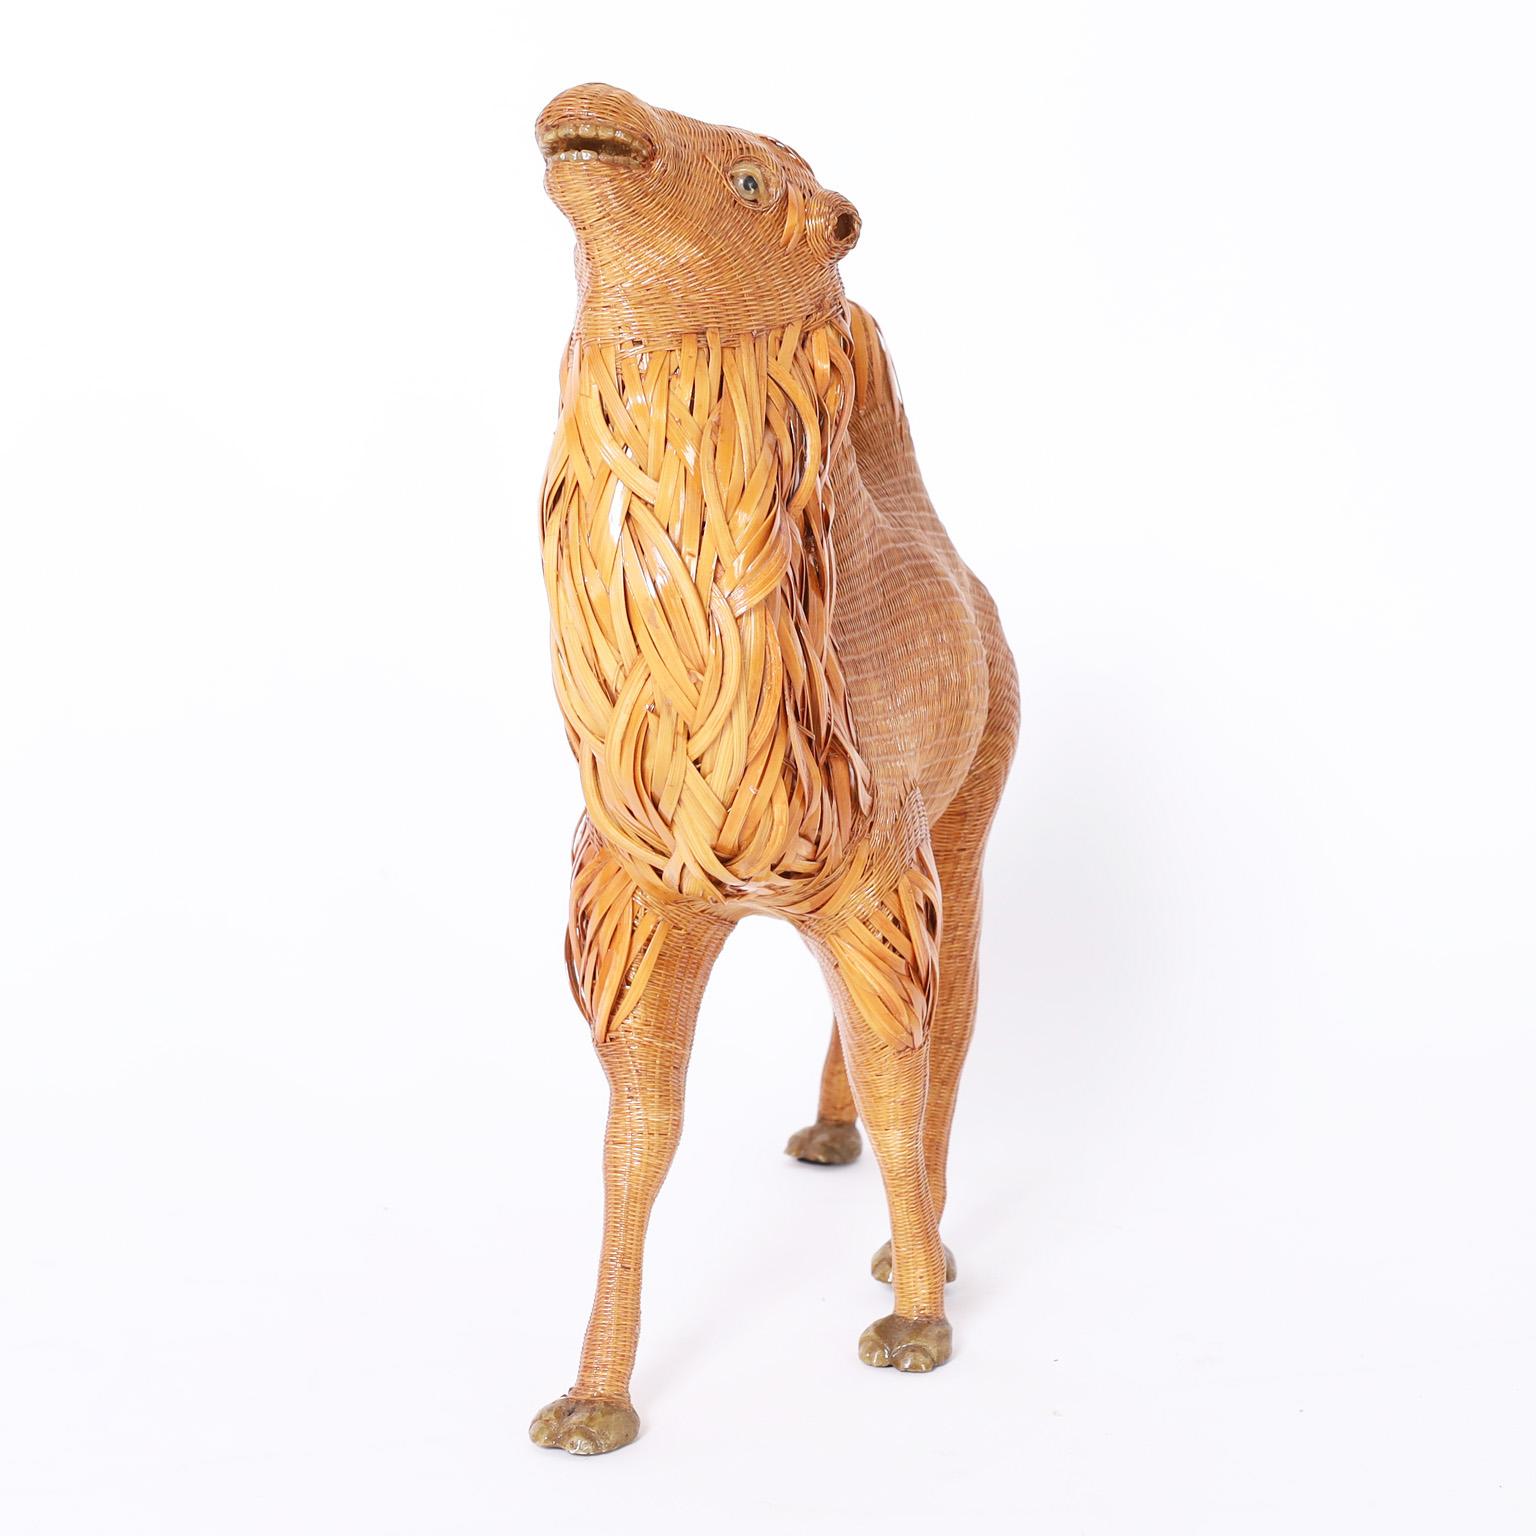 Mid century Chinese smiling camel caught in mid strut, ambitiously crafted in wicker with wood highlights. From the noted Shanghai Collection.